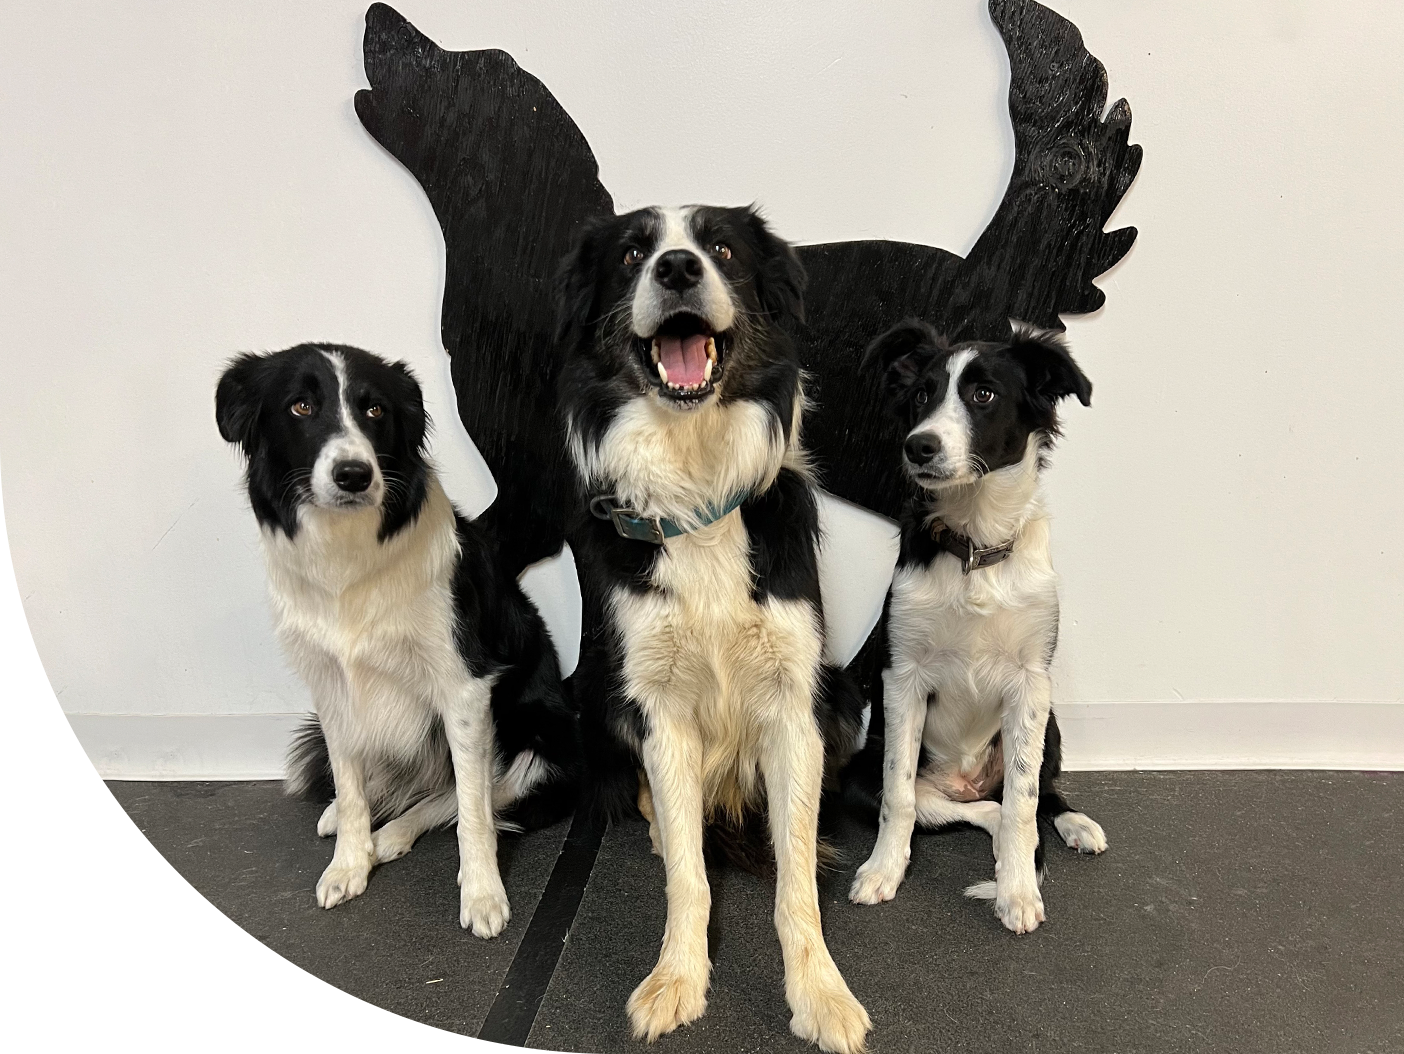 three dogs posing for the camera